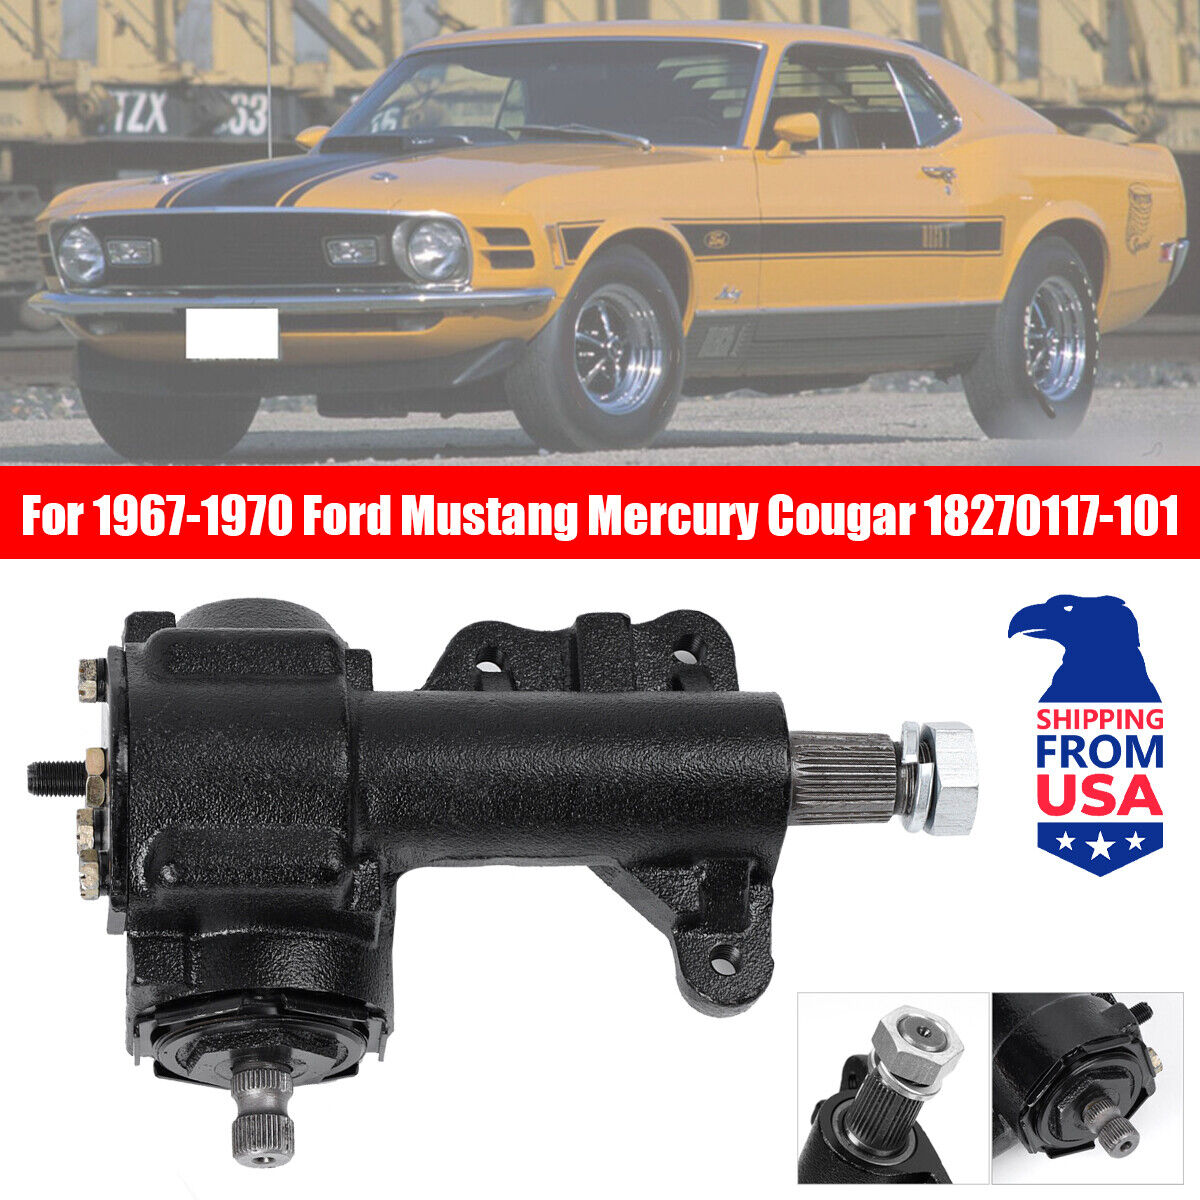 Manual Steering Gear Box For 1967-1970 Ford Mustang Mercury Cougar 18270117-101`